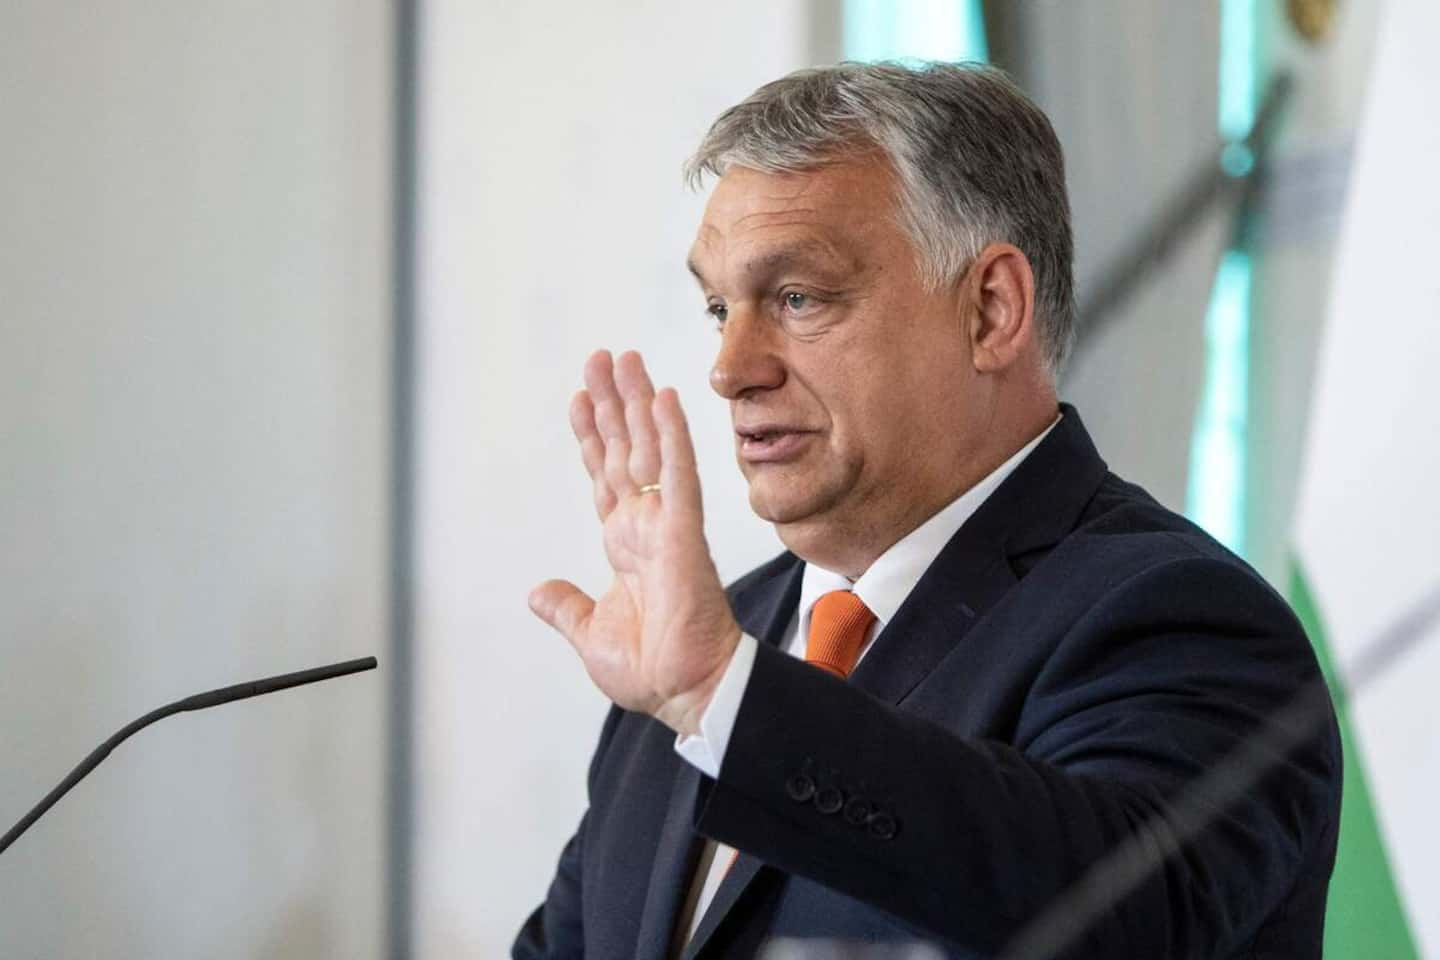 “Mixing of races”: Viktor Orban defends “a cultural point of view”